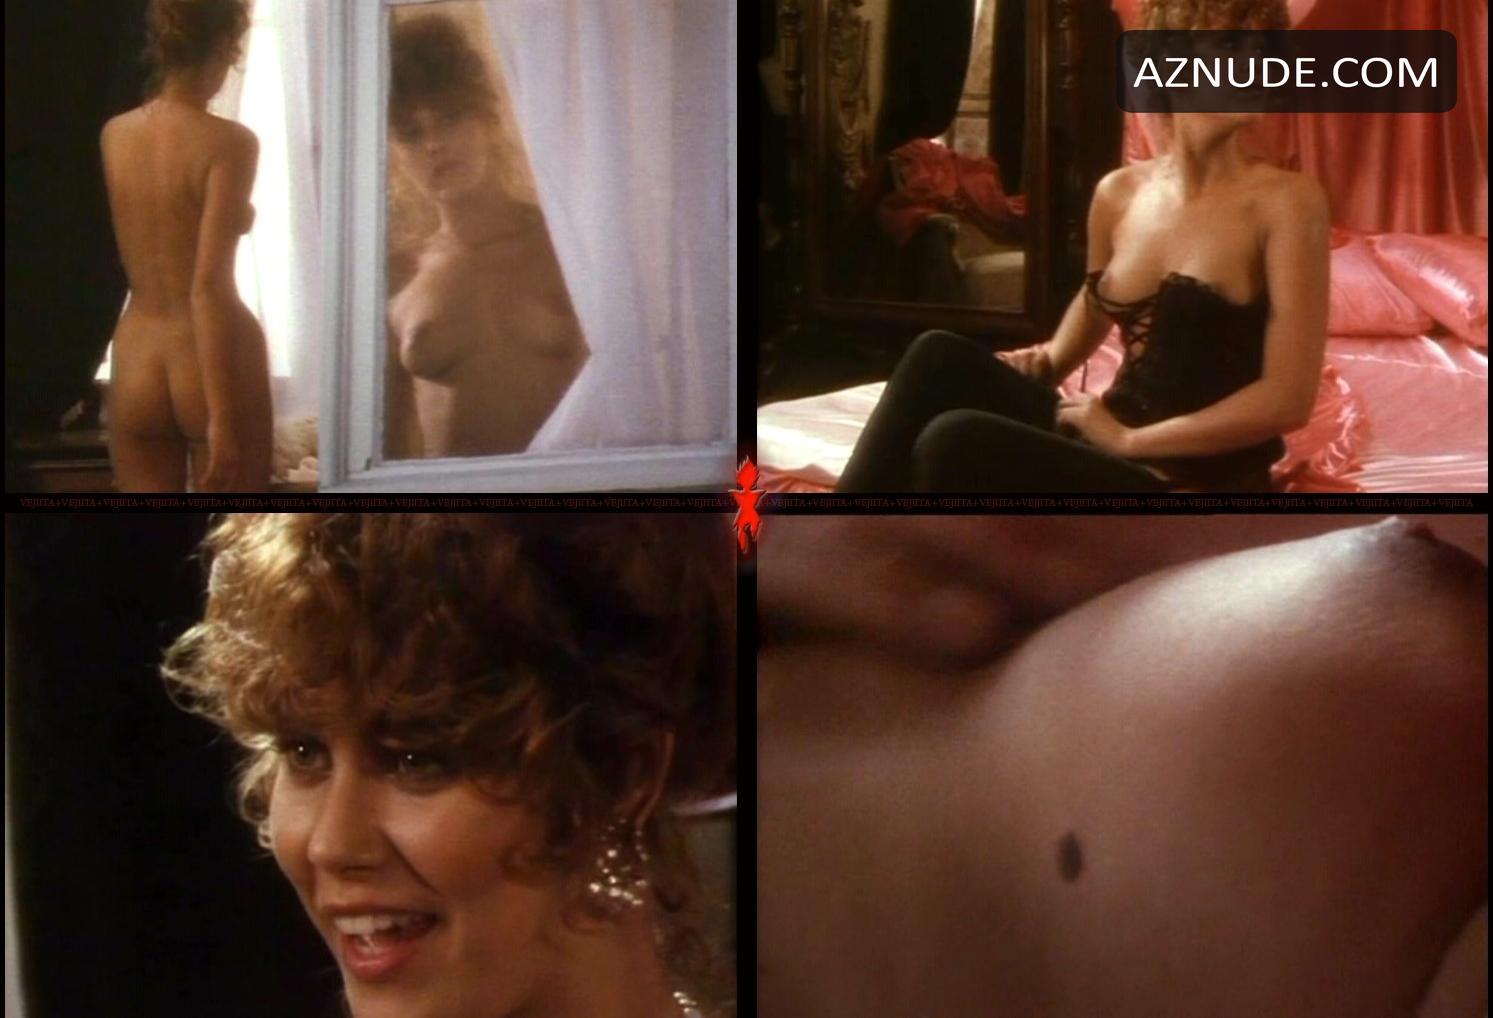 Donna pescow topless